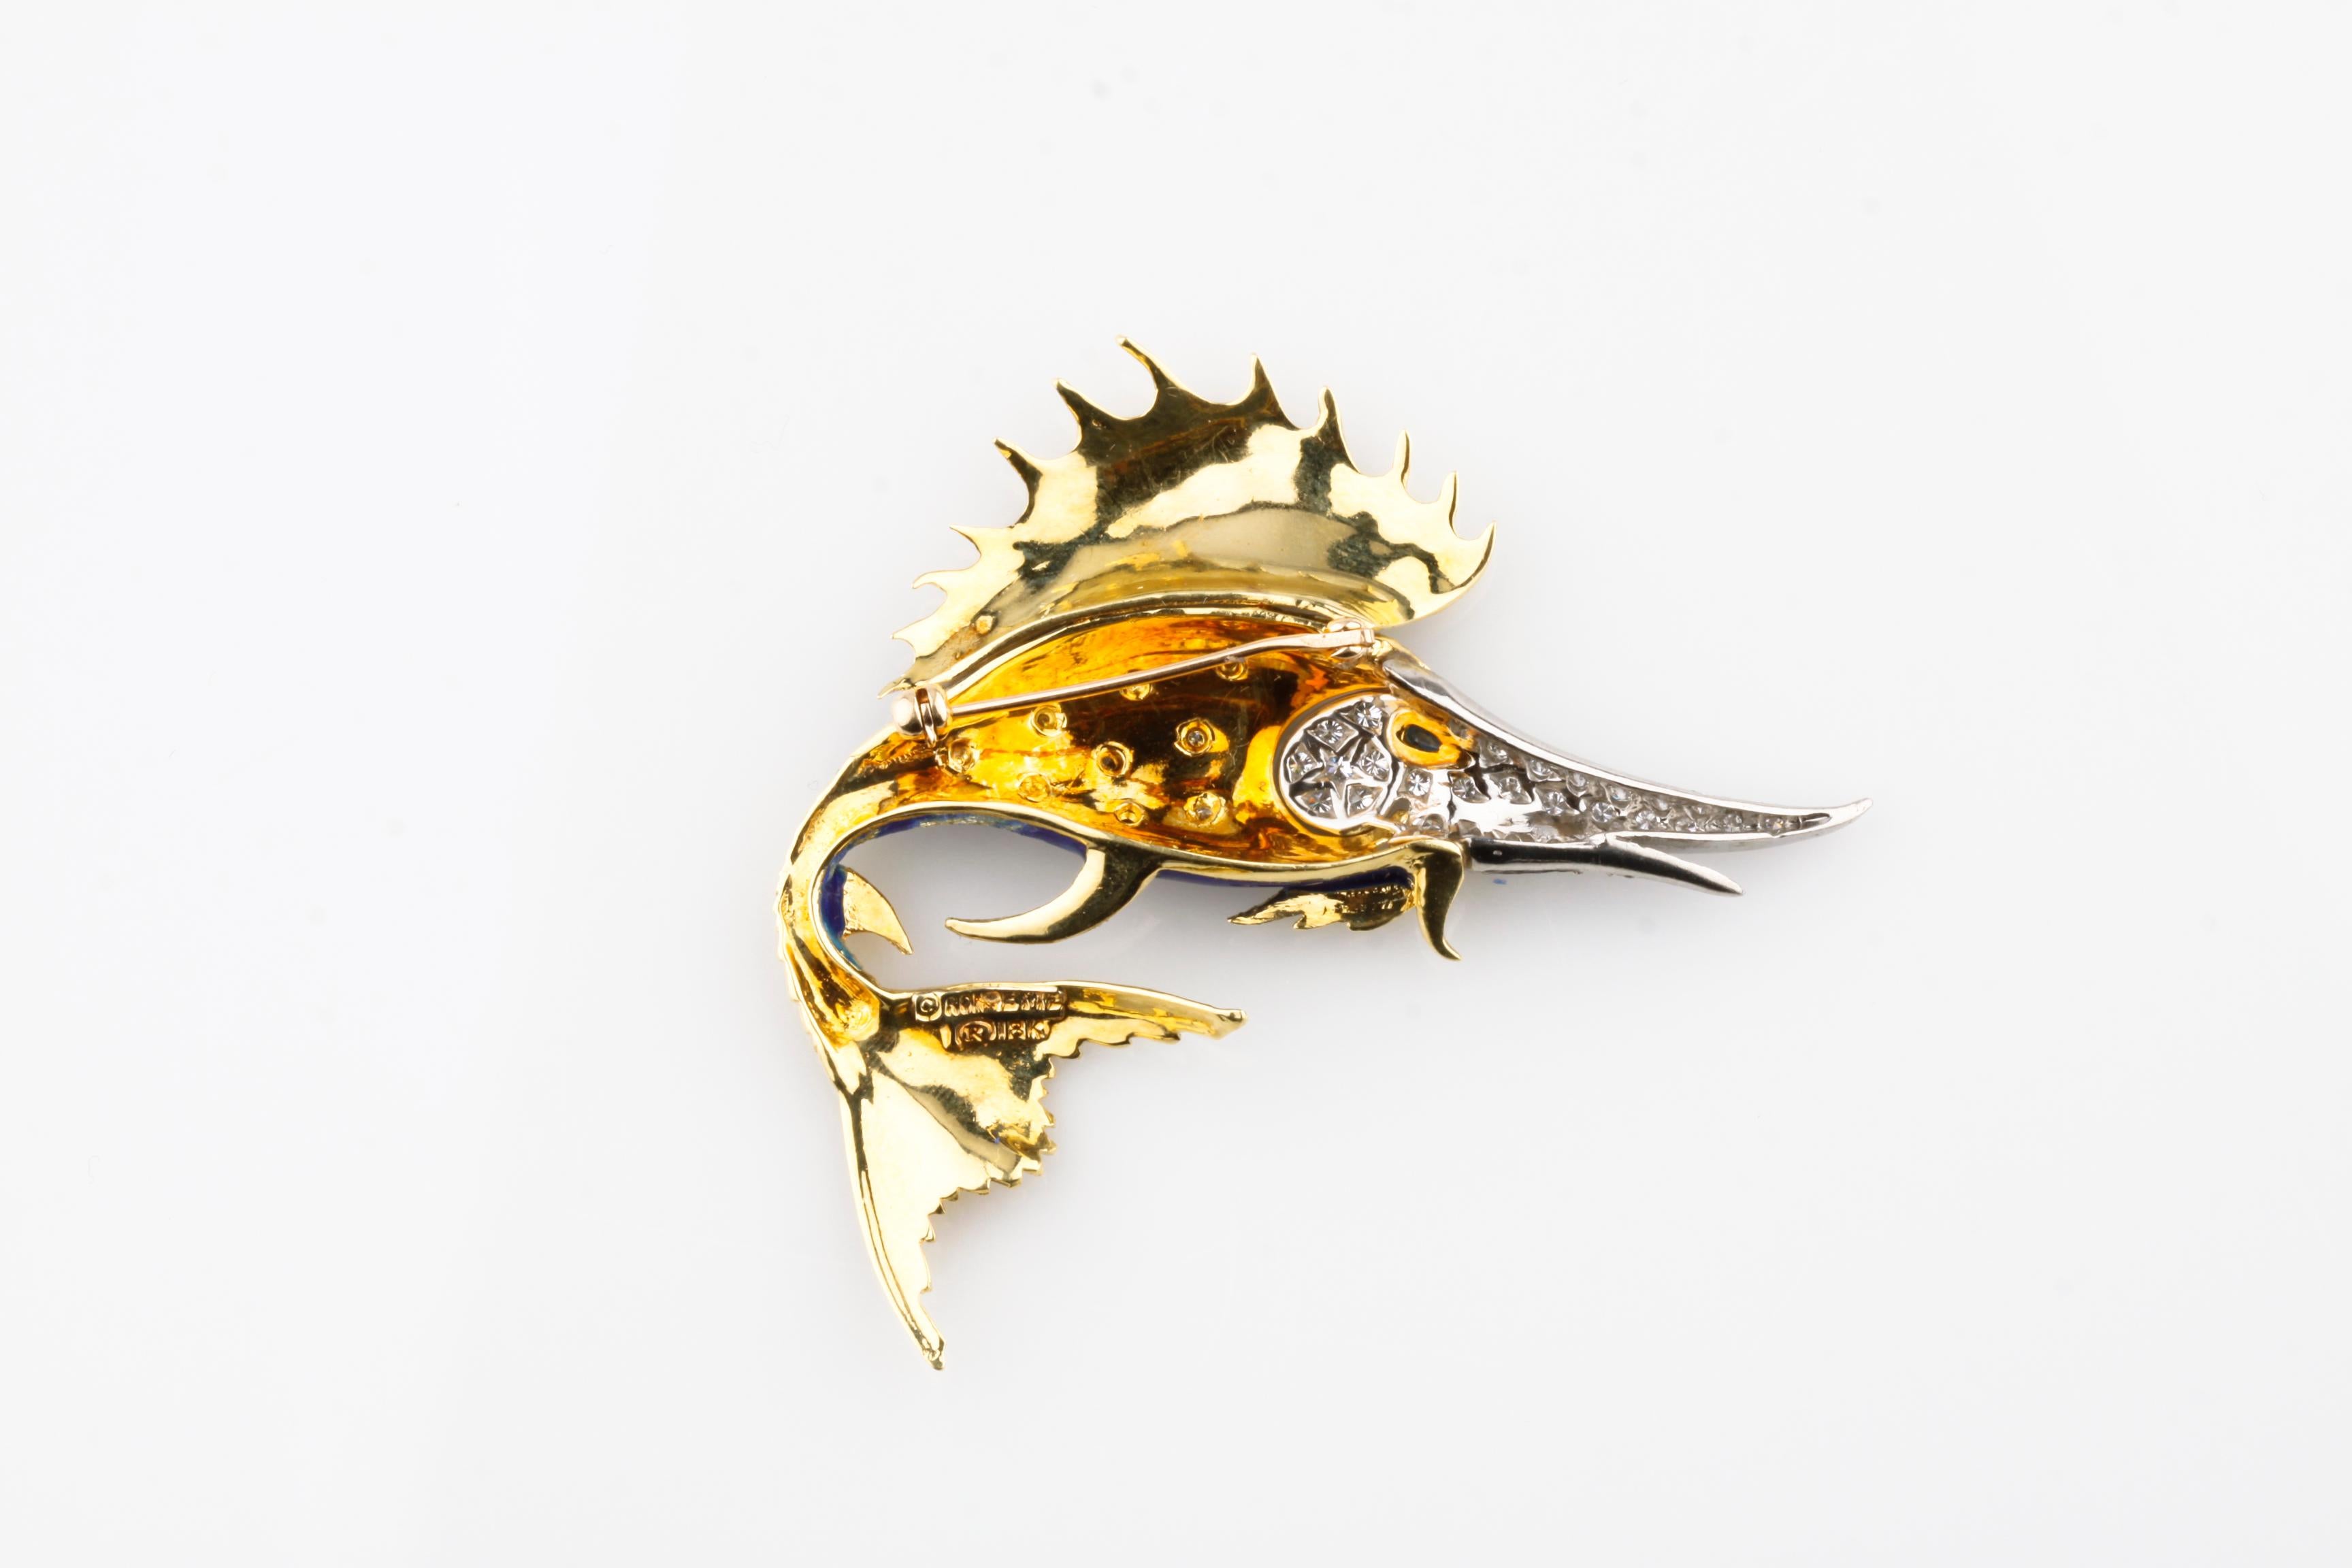 Gorgeous Brooch of a Sailfish by Rondette
18k Yellow Gold with Blue Enamel, Diamonds, and Pear Shaped Sapphire Accents
Rhodium Accents on Sword
Total Diamond Weight = Approximately 0.90 Ct
Sapphire Approximately = 0.30 Ct
Total Mass = 20.6